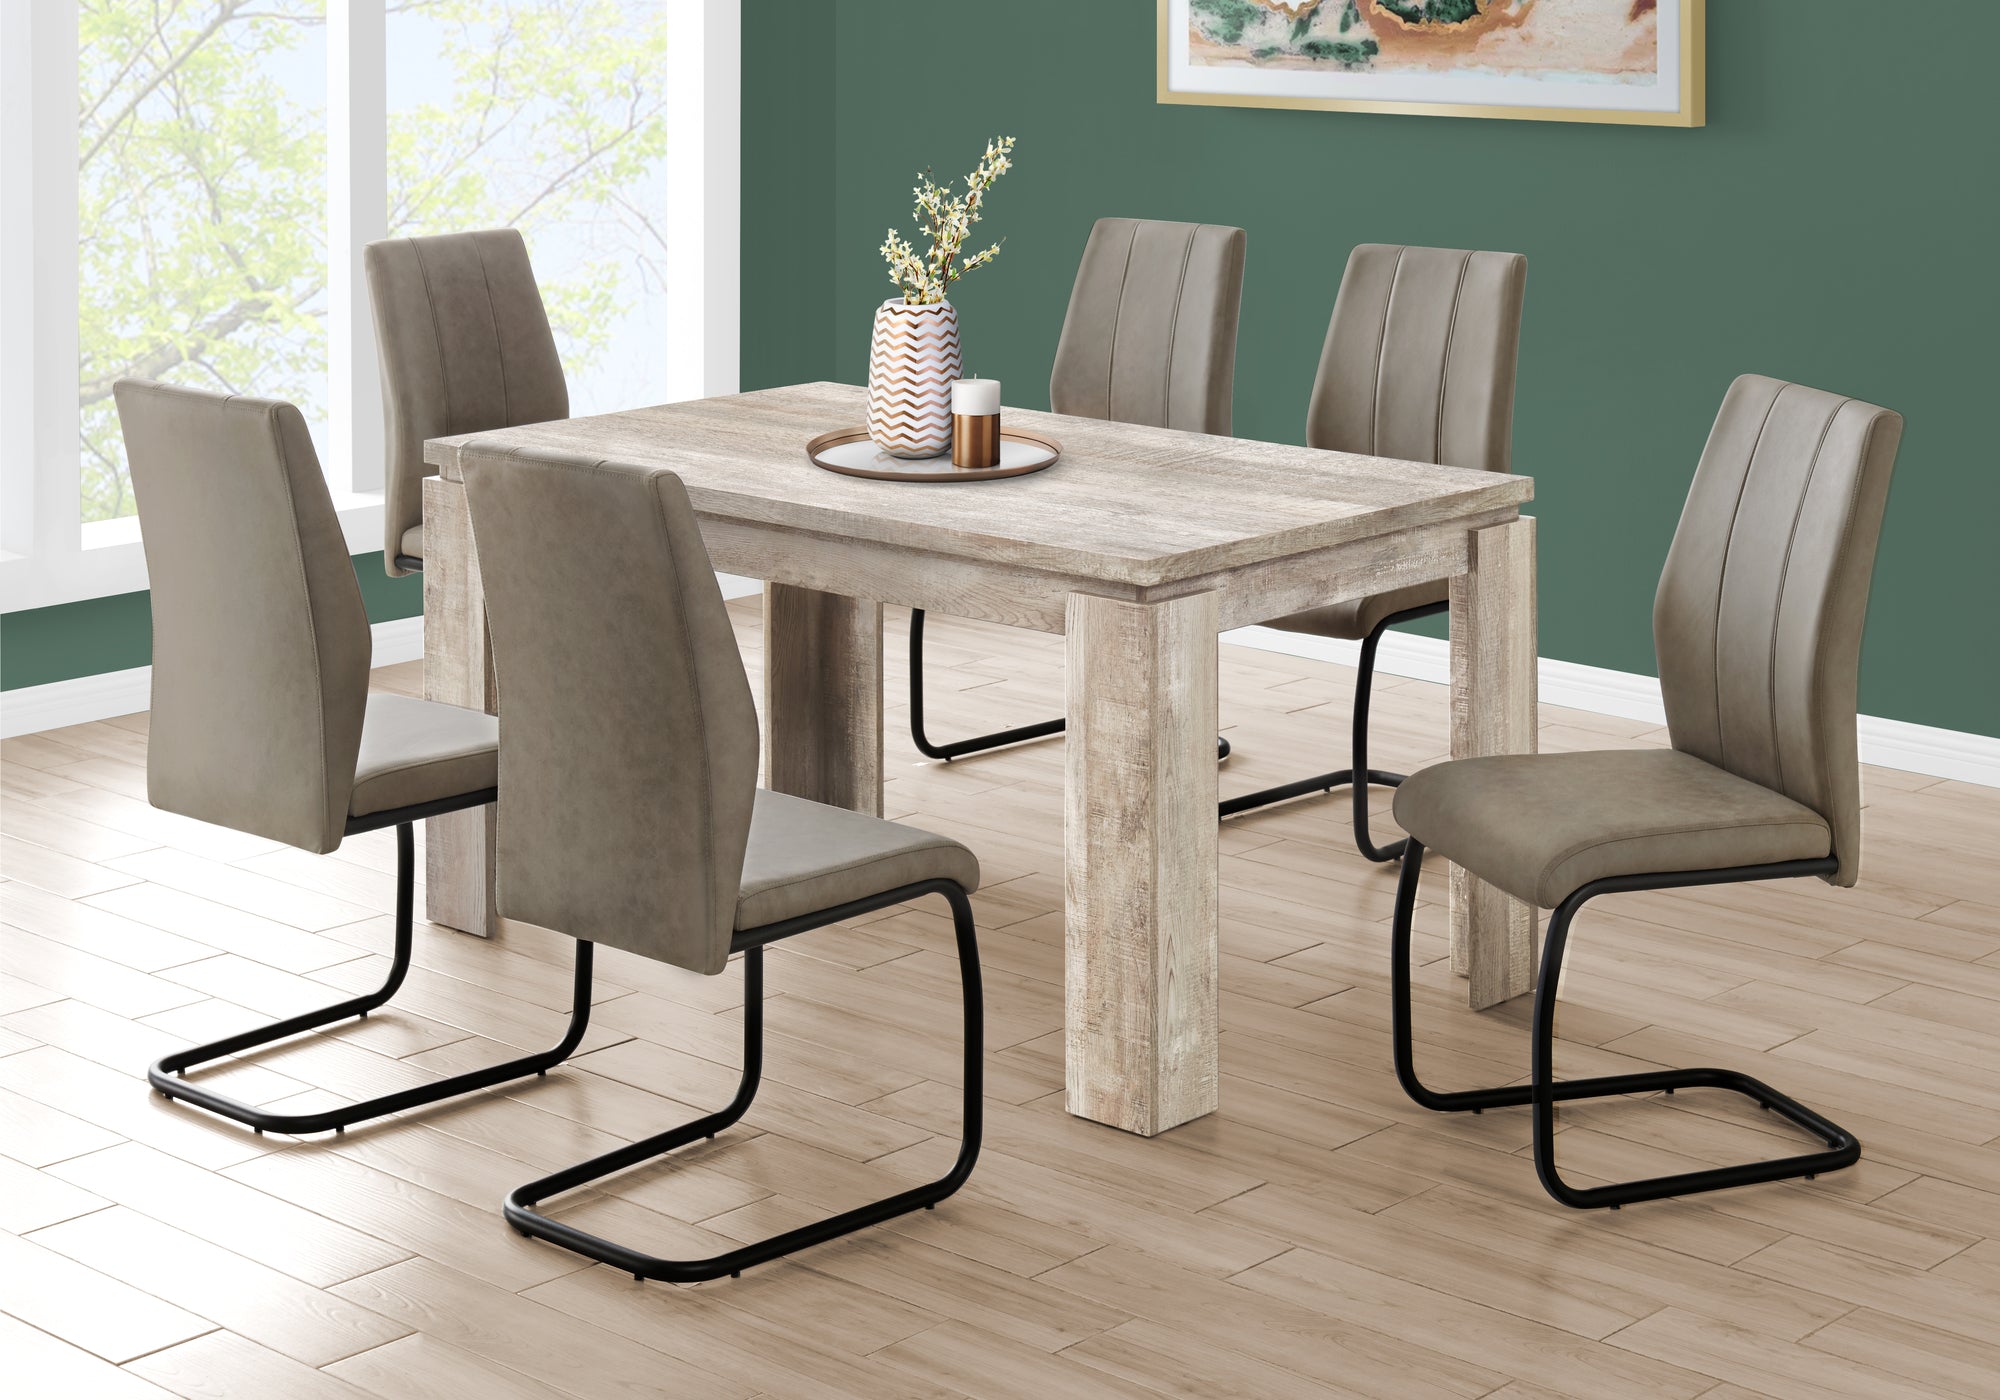 Contemporary Sturdy and Stable Dining Table - 36" x 60" (Taupe)